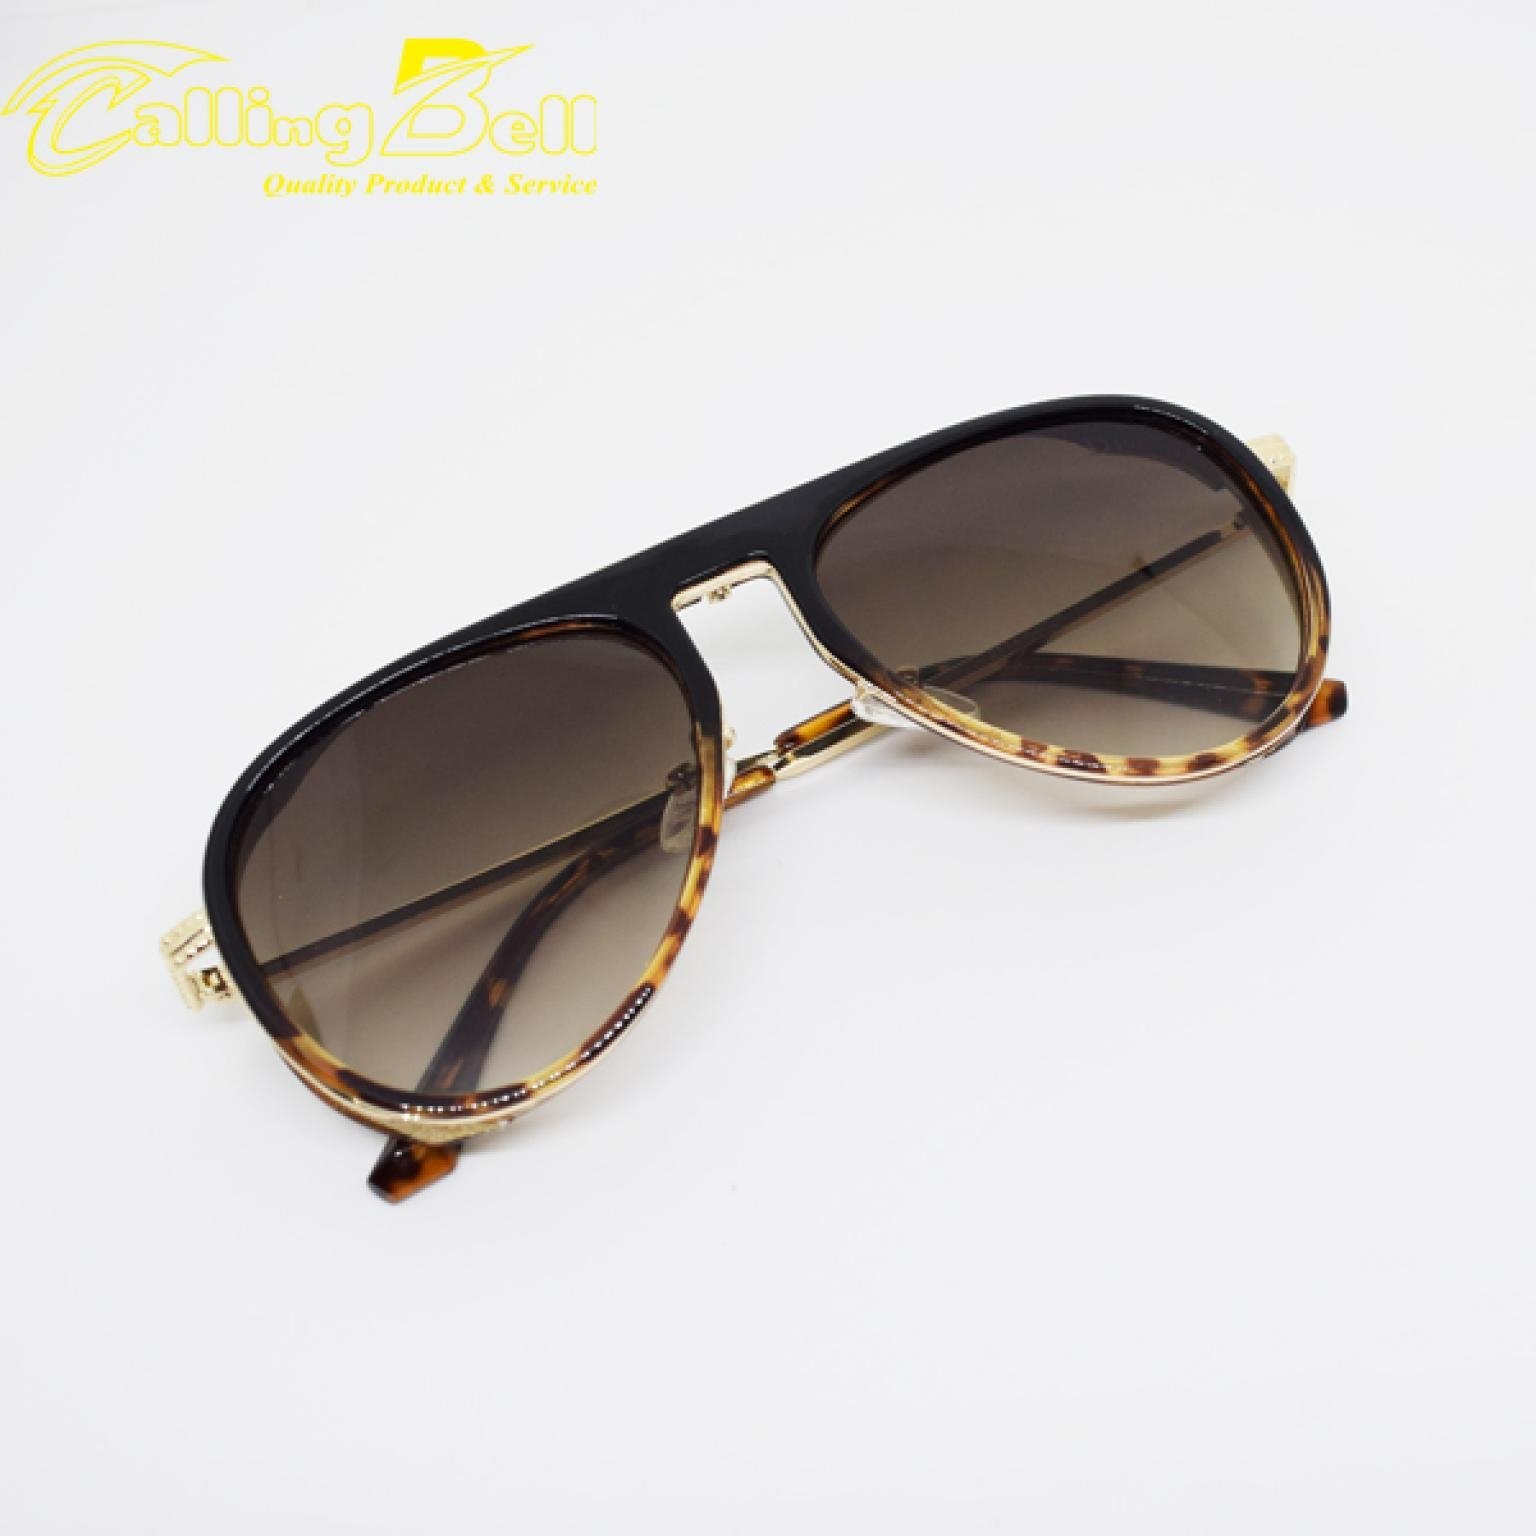 Unique Design Stylish Unisex Most Trendy Sunglass For Men Women Uv400 Protected With Brown colour Golden Frame Full Metal Body